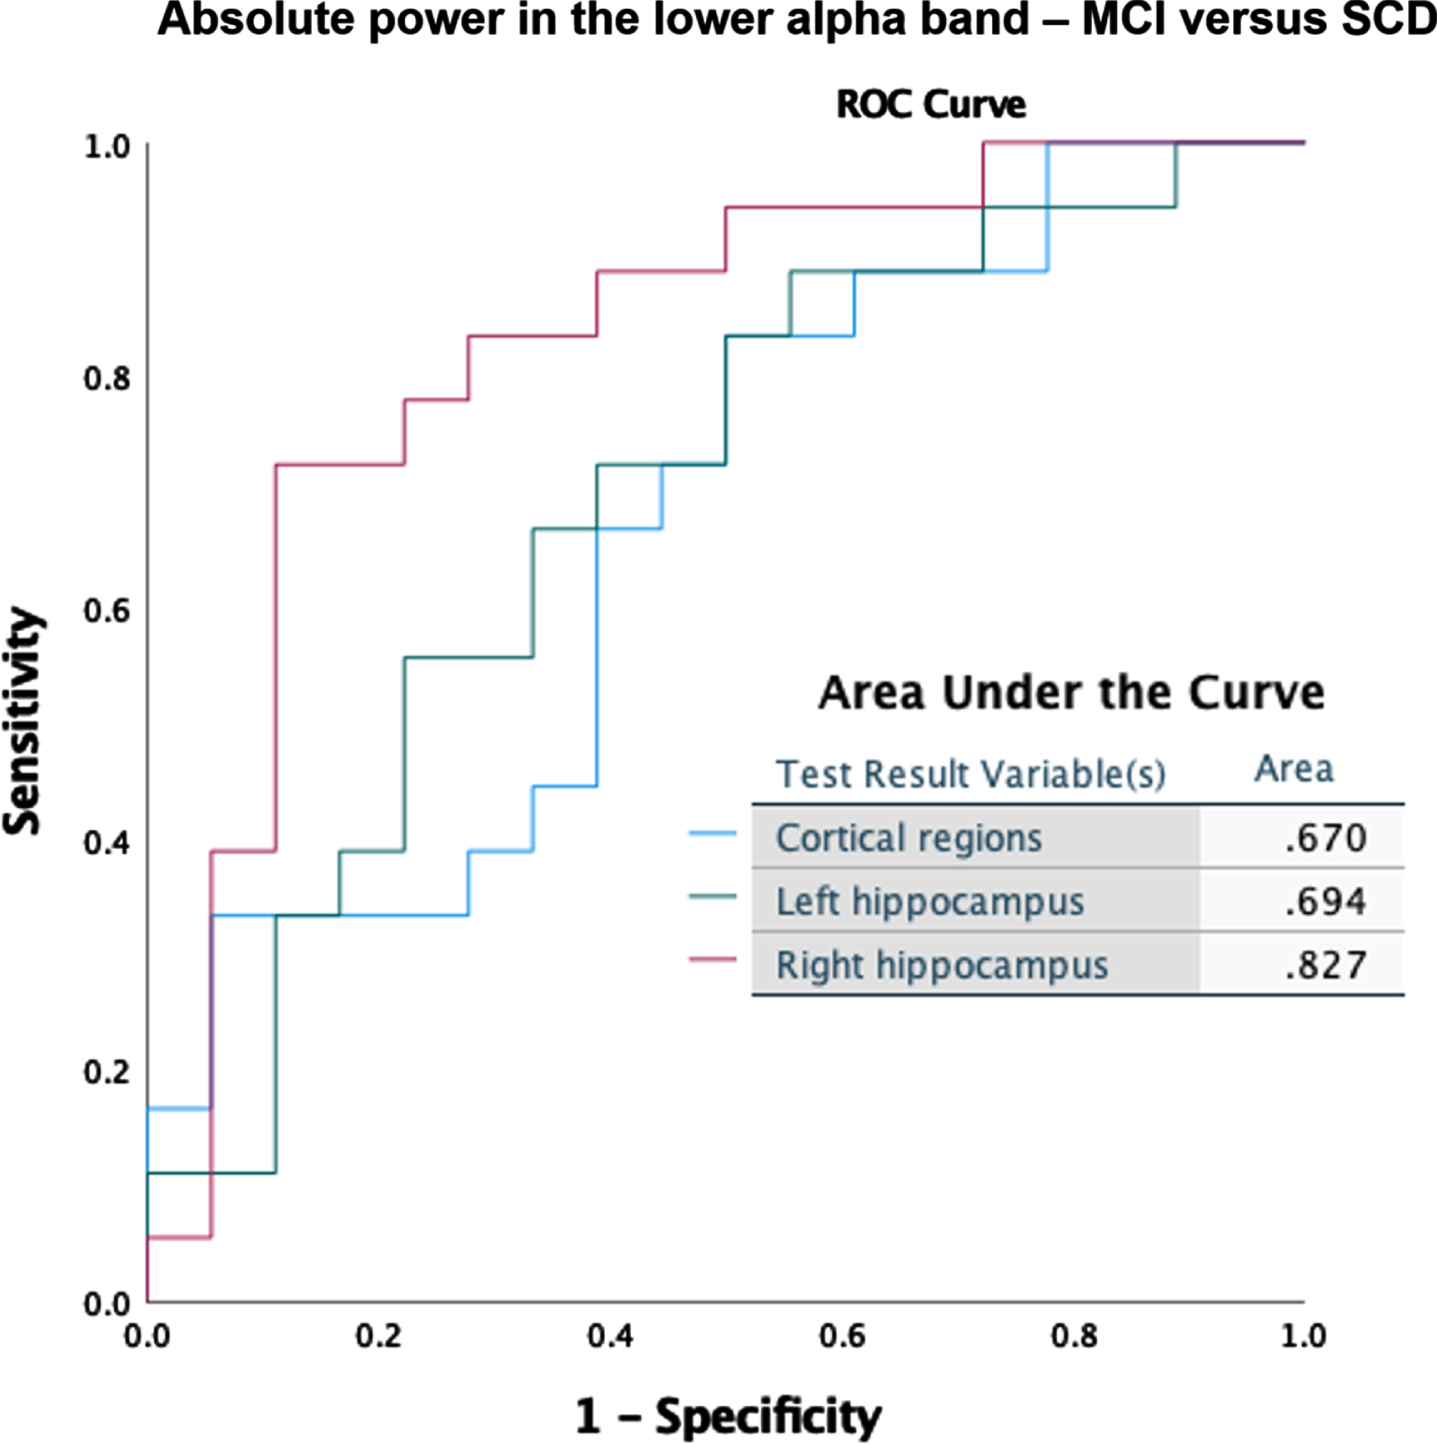 ROC curves for classification between MCI and SCD, based on absolute power in the lower alpha band (8–10 Hz).